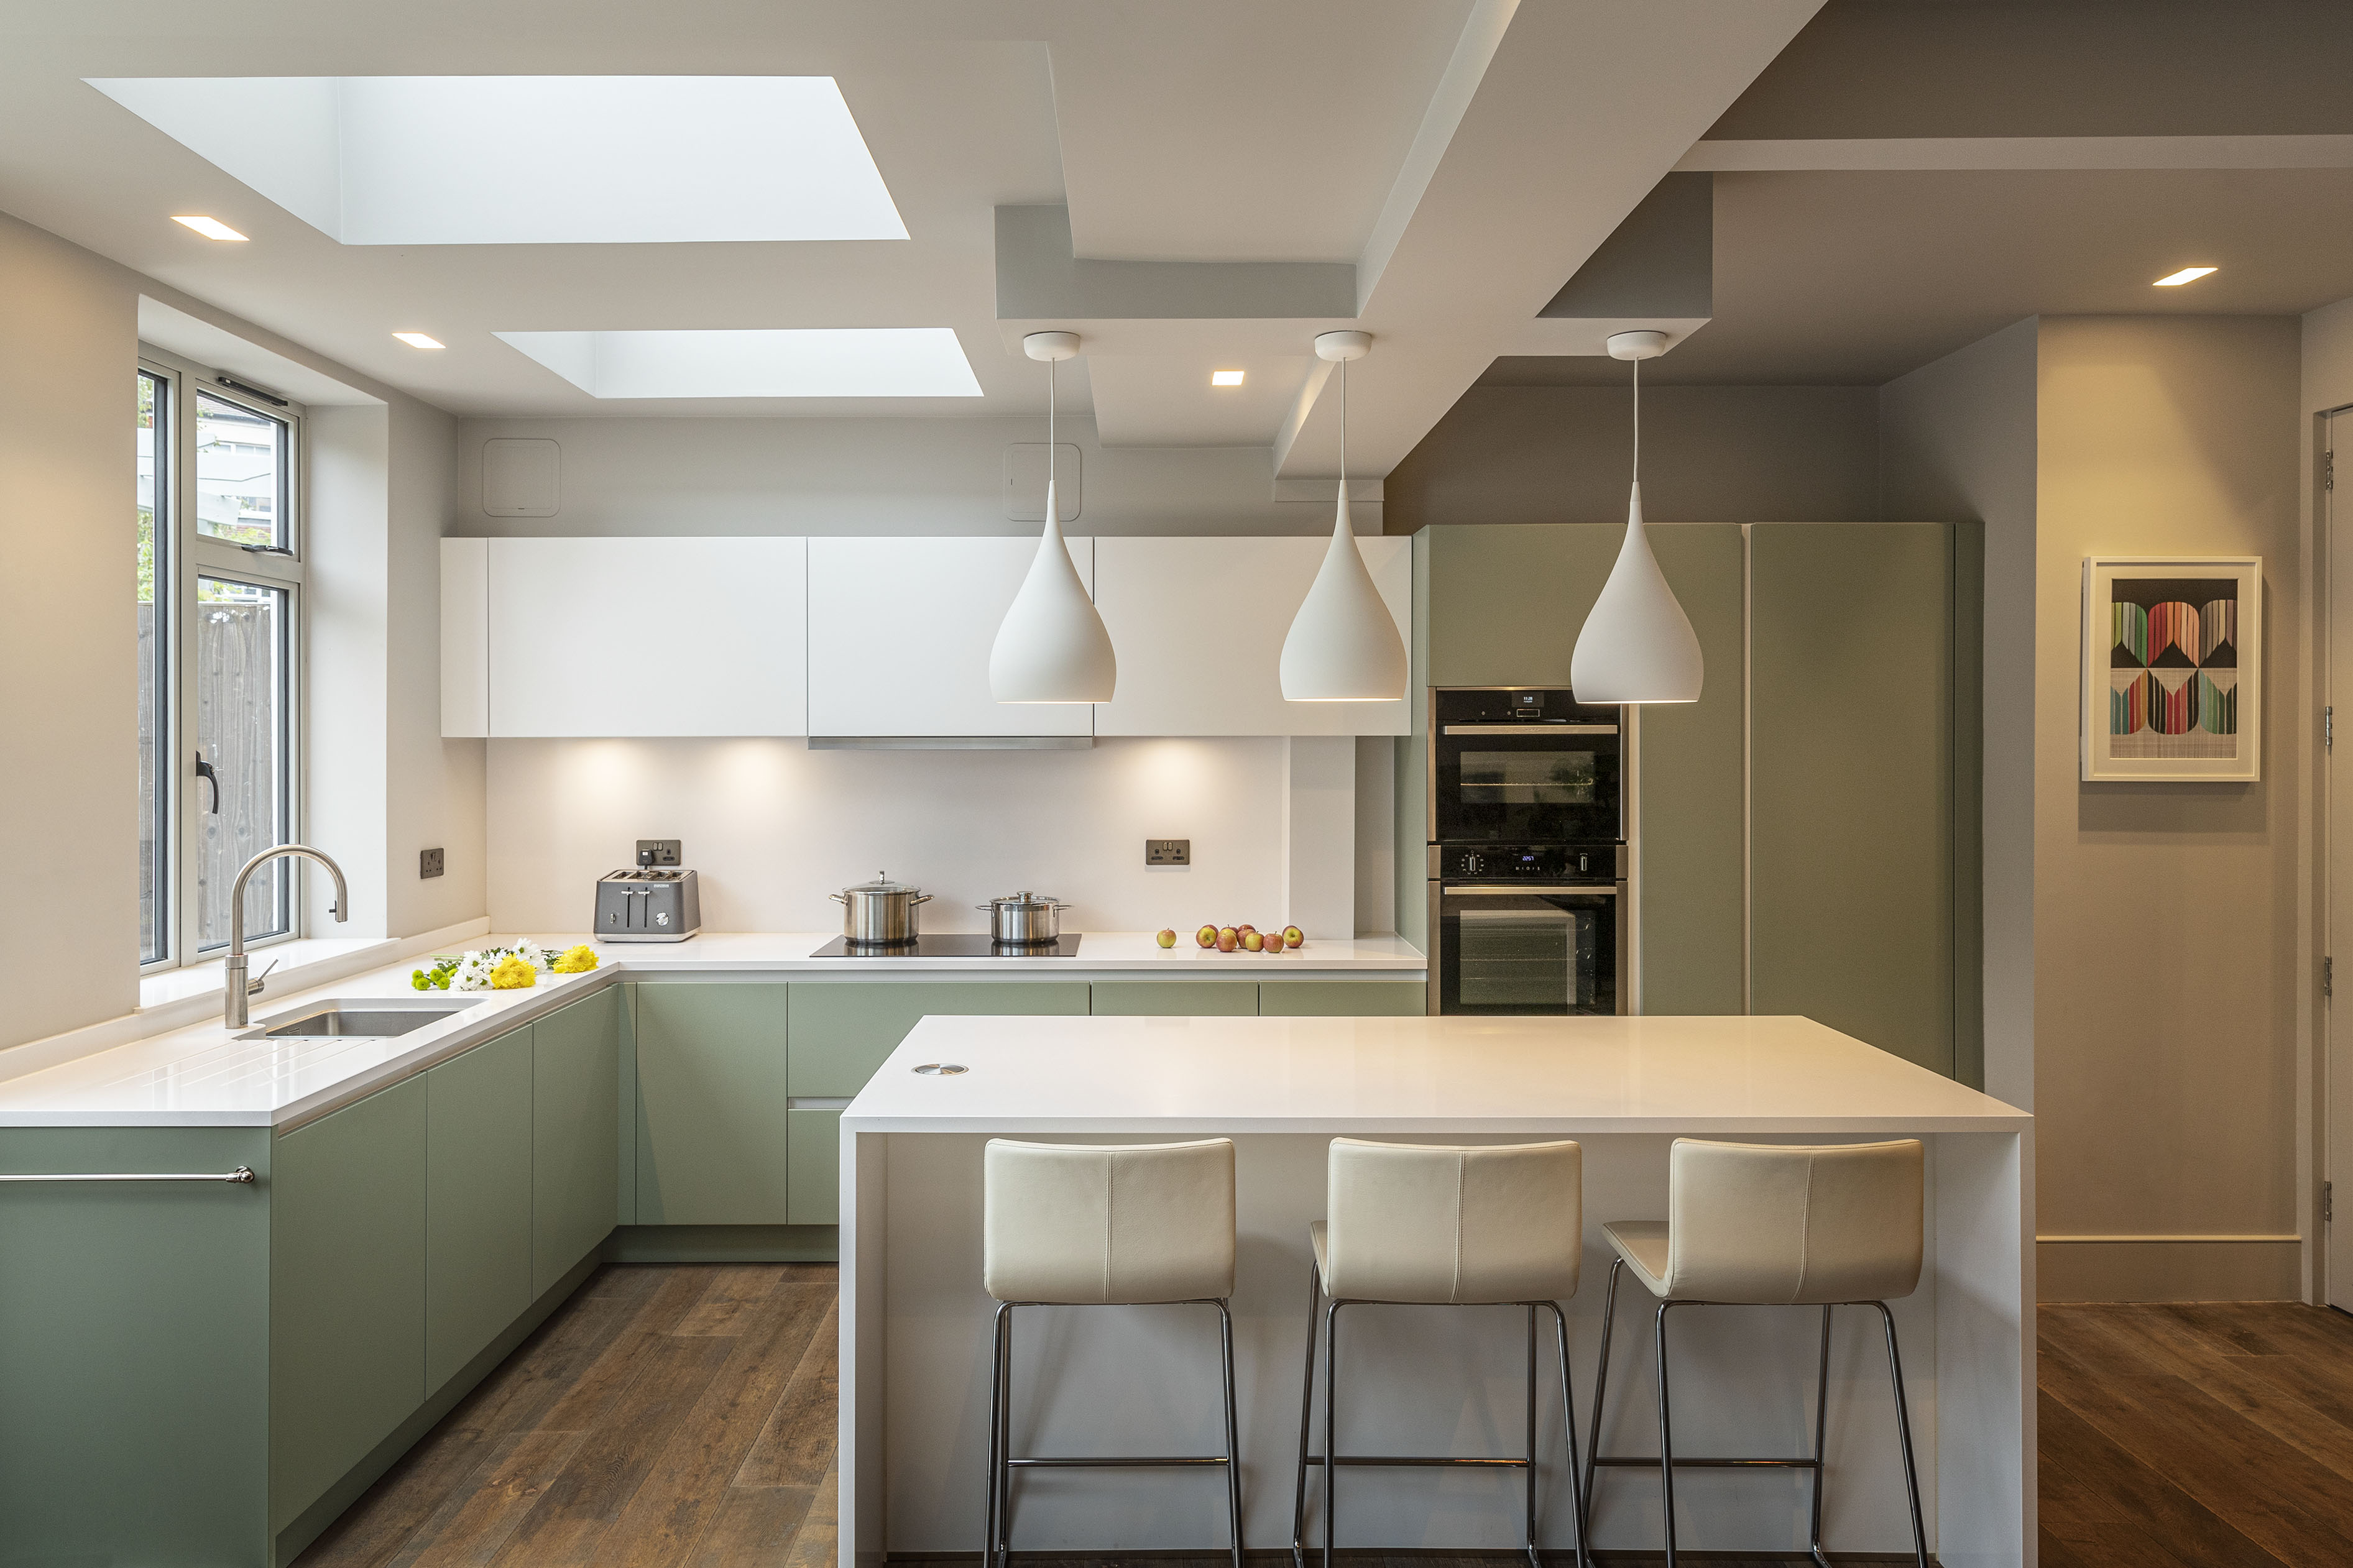 Things to Consider When Lighting Your Kitchen